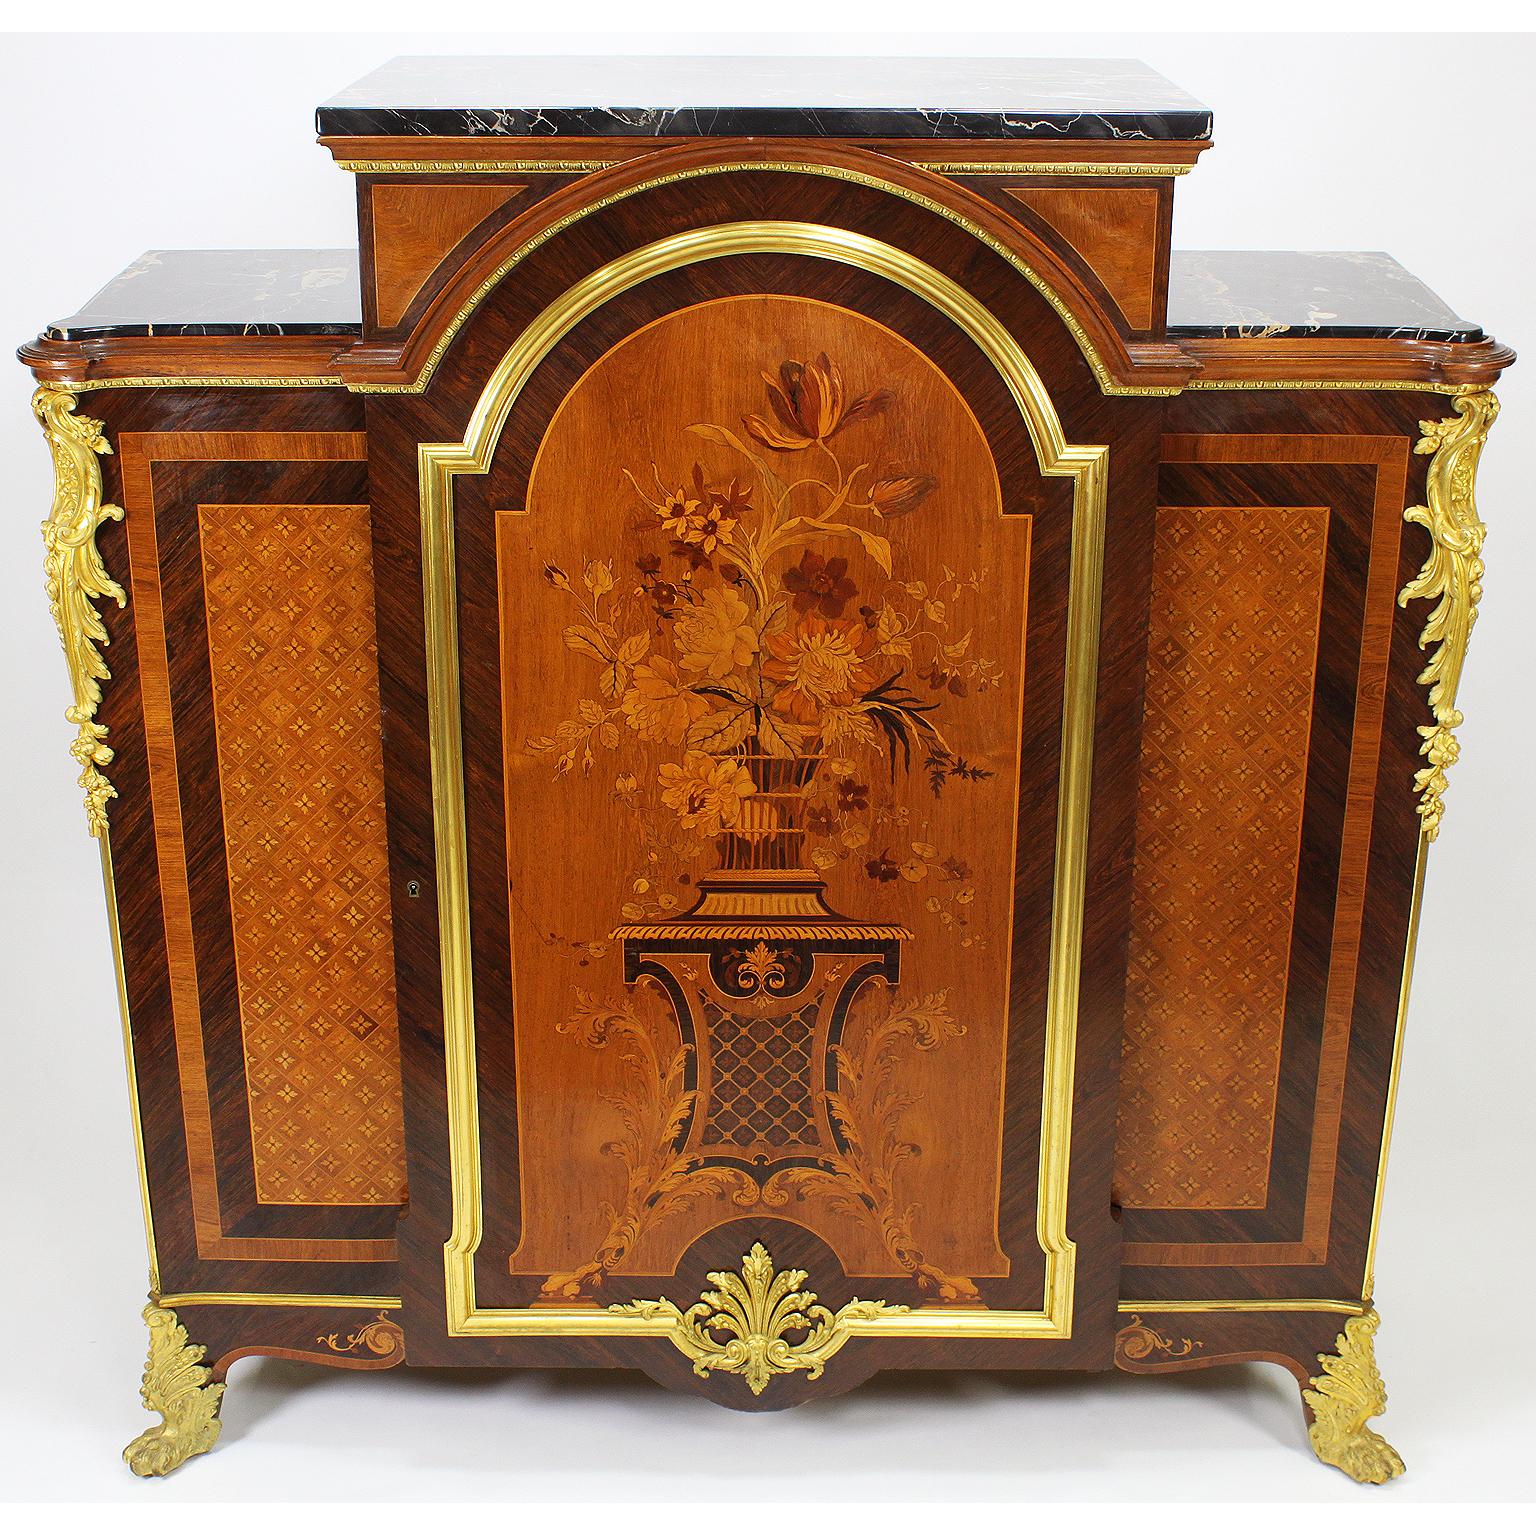 A very fine French Louis XV style Palissandre, Tulipwood, mahogany and Marquetry Meuble D' Appui with one door and veined black marble top, Stamped: M. Descotte & Fils, circa 1880-1890.

Measures: Height 50 1/2 inches (128.3 cm)
Width 48 1/2